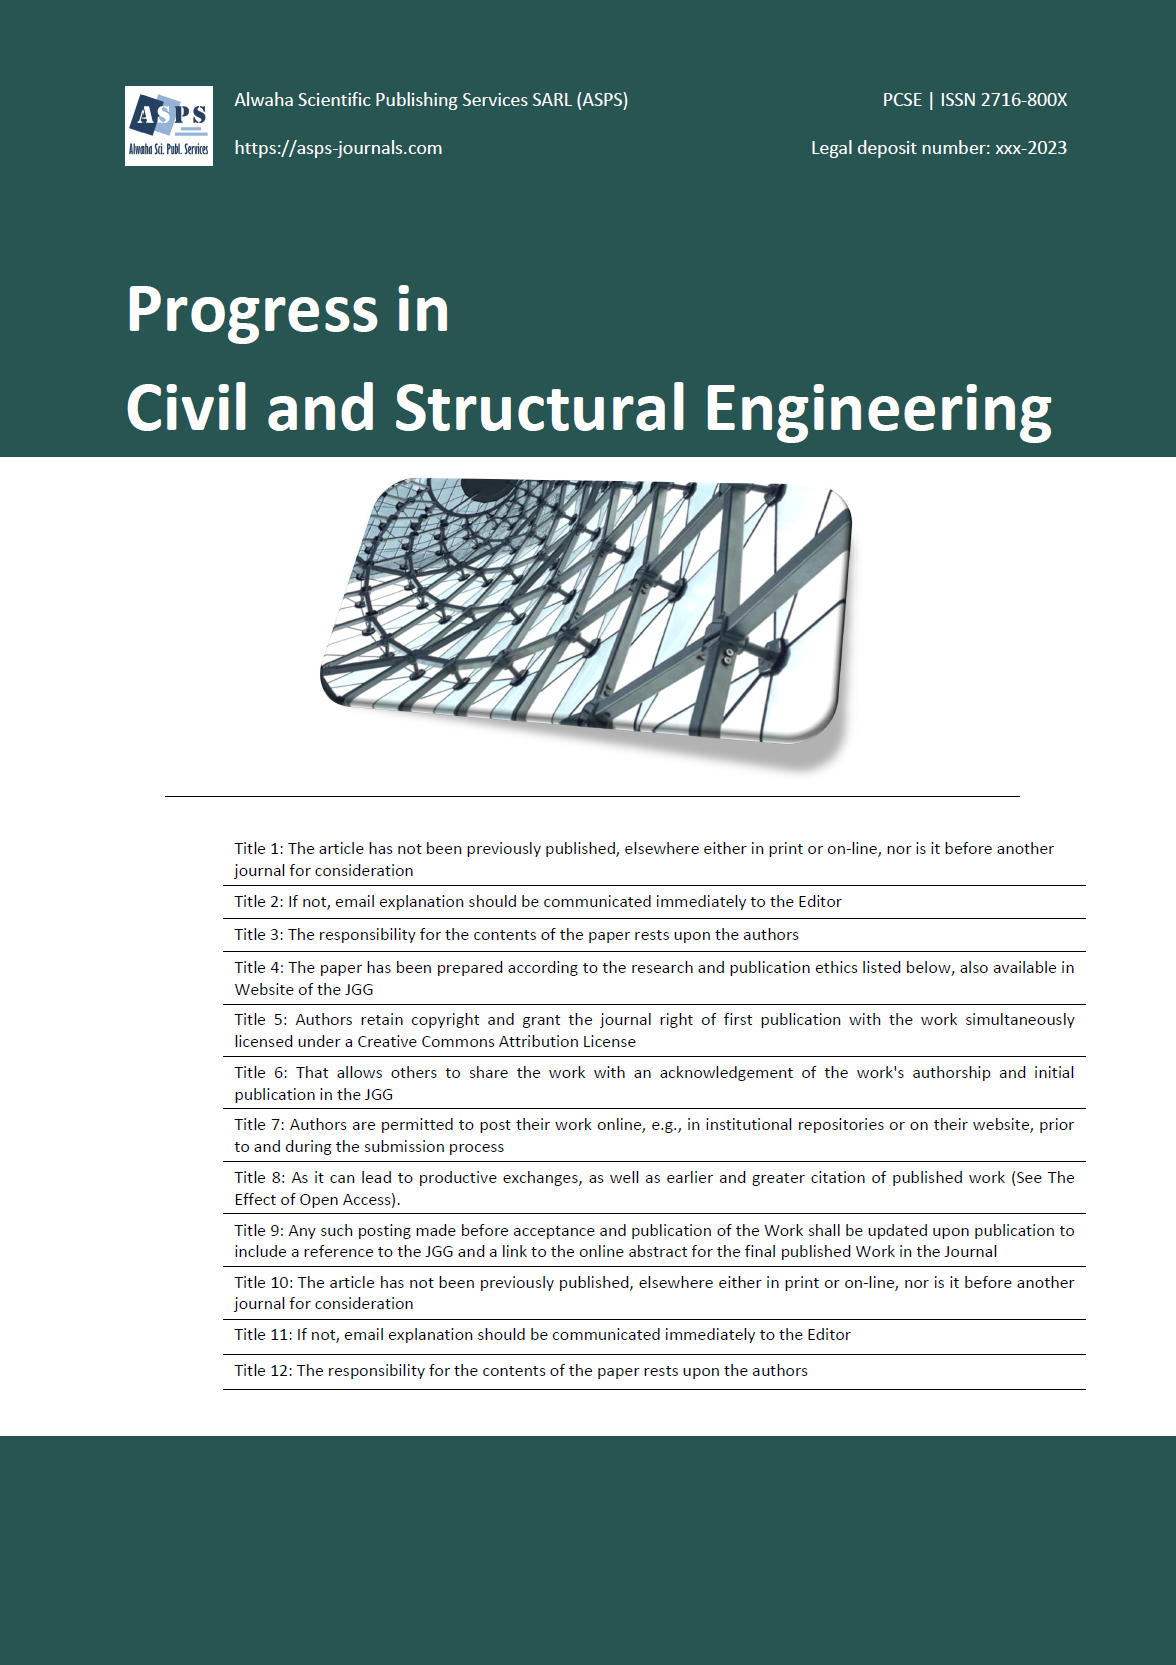 Progress in Civil and Structural Engineering (PCSE)